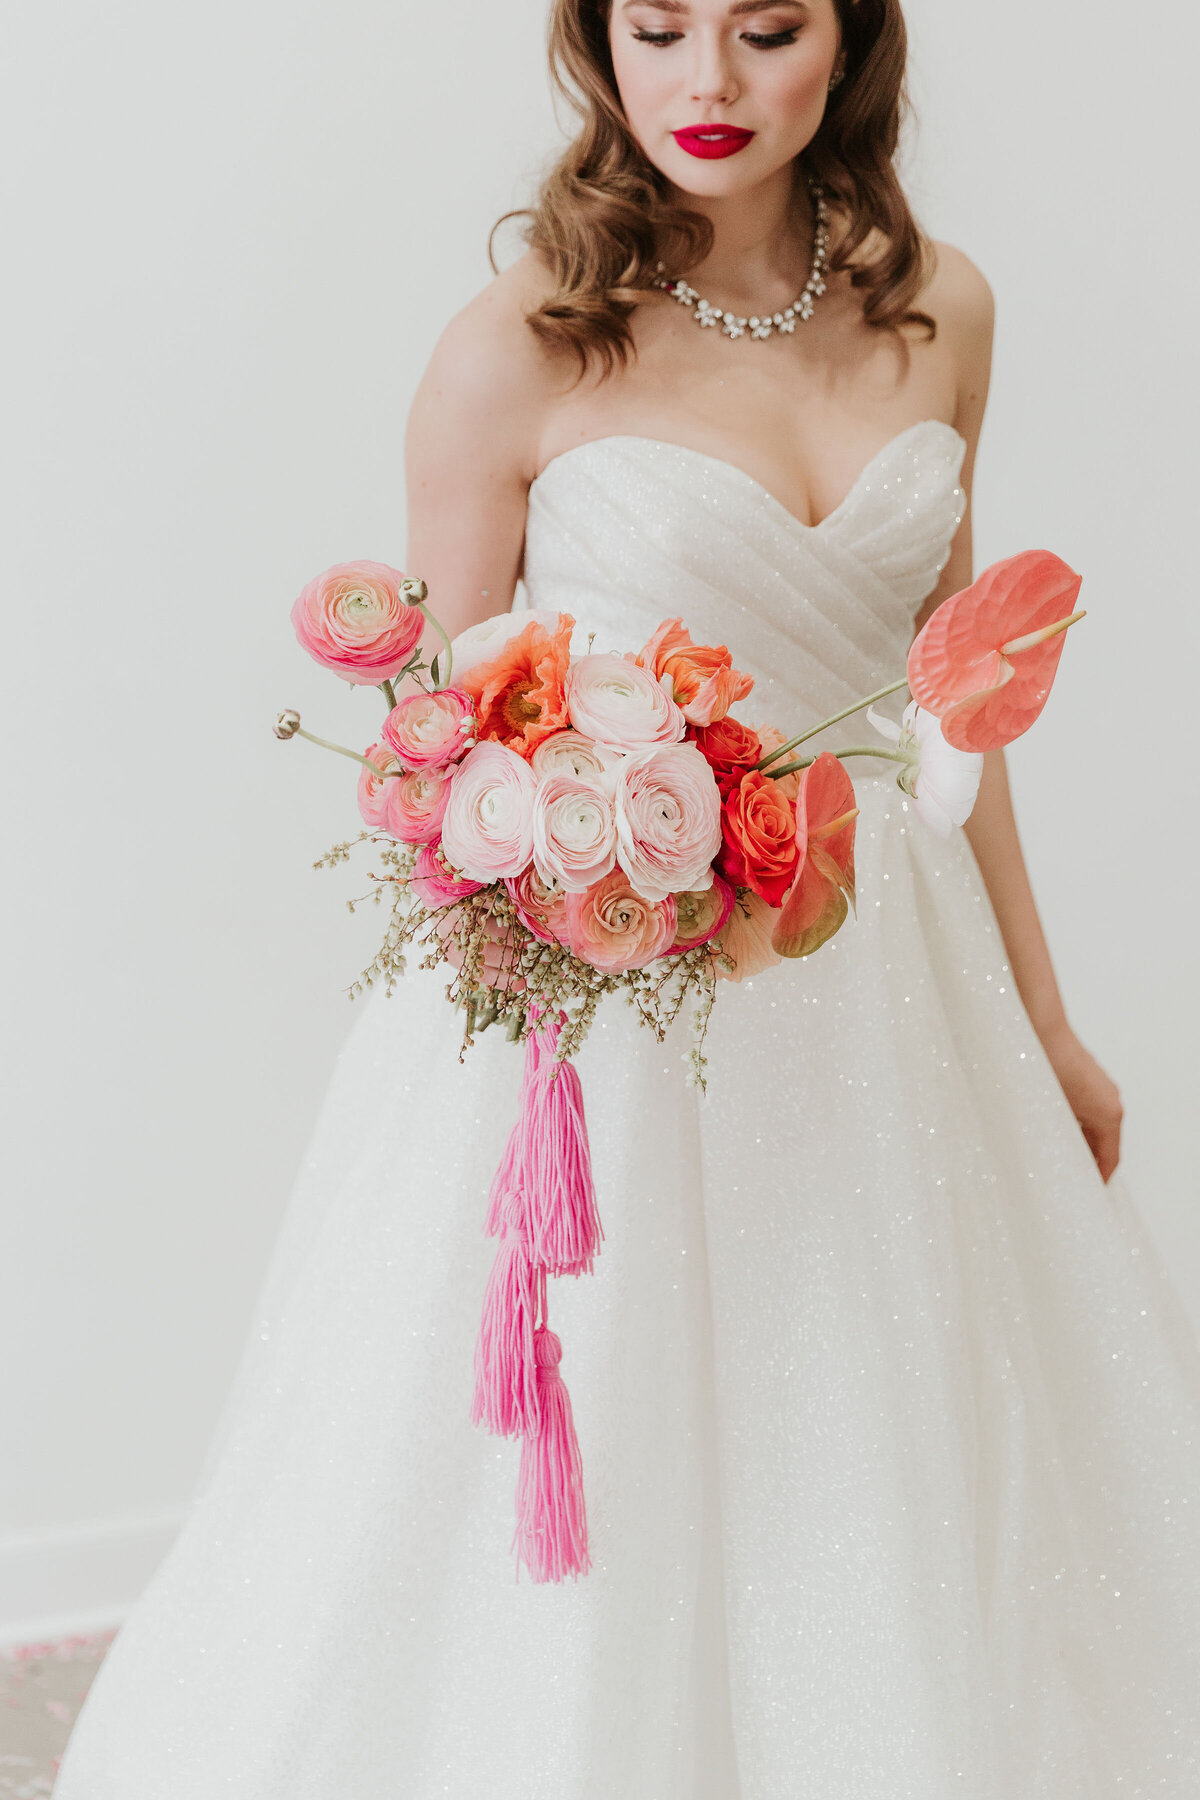 Contemporary bride holding colourful pink bouquet, wearing gown from Cameo & Cufflinks, a contemporary bridal boutique based in Calgary, Alberta. Featured on the Brontë Bride Vendor Guide.